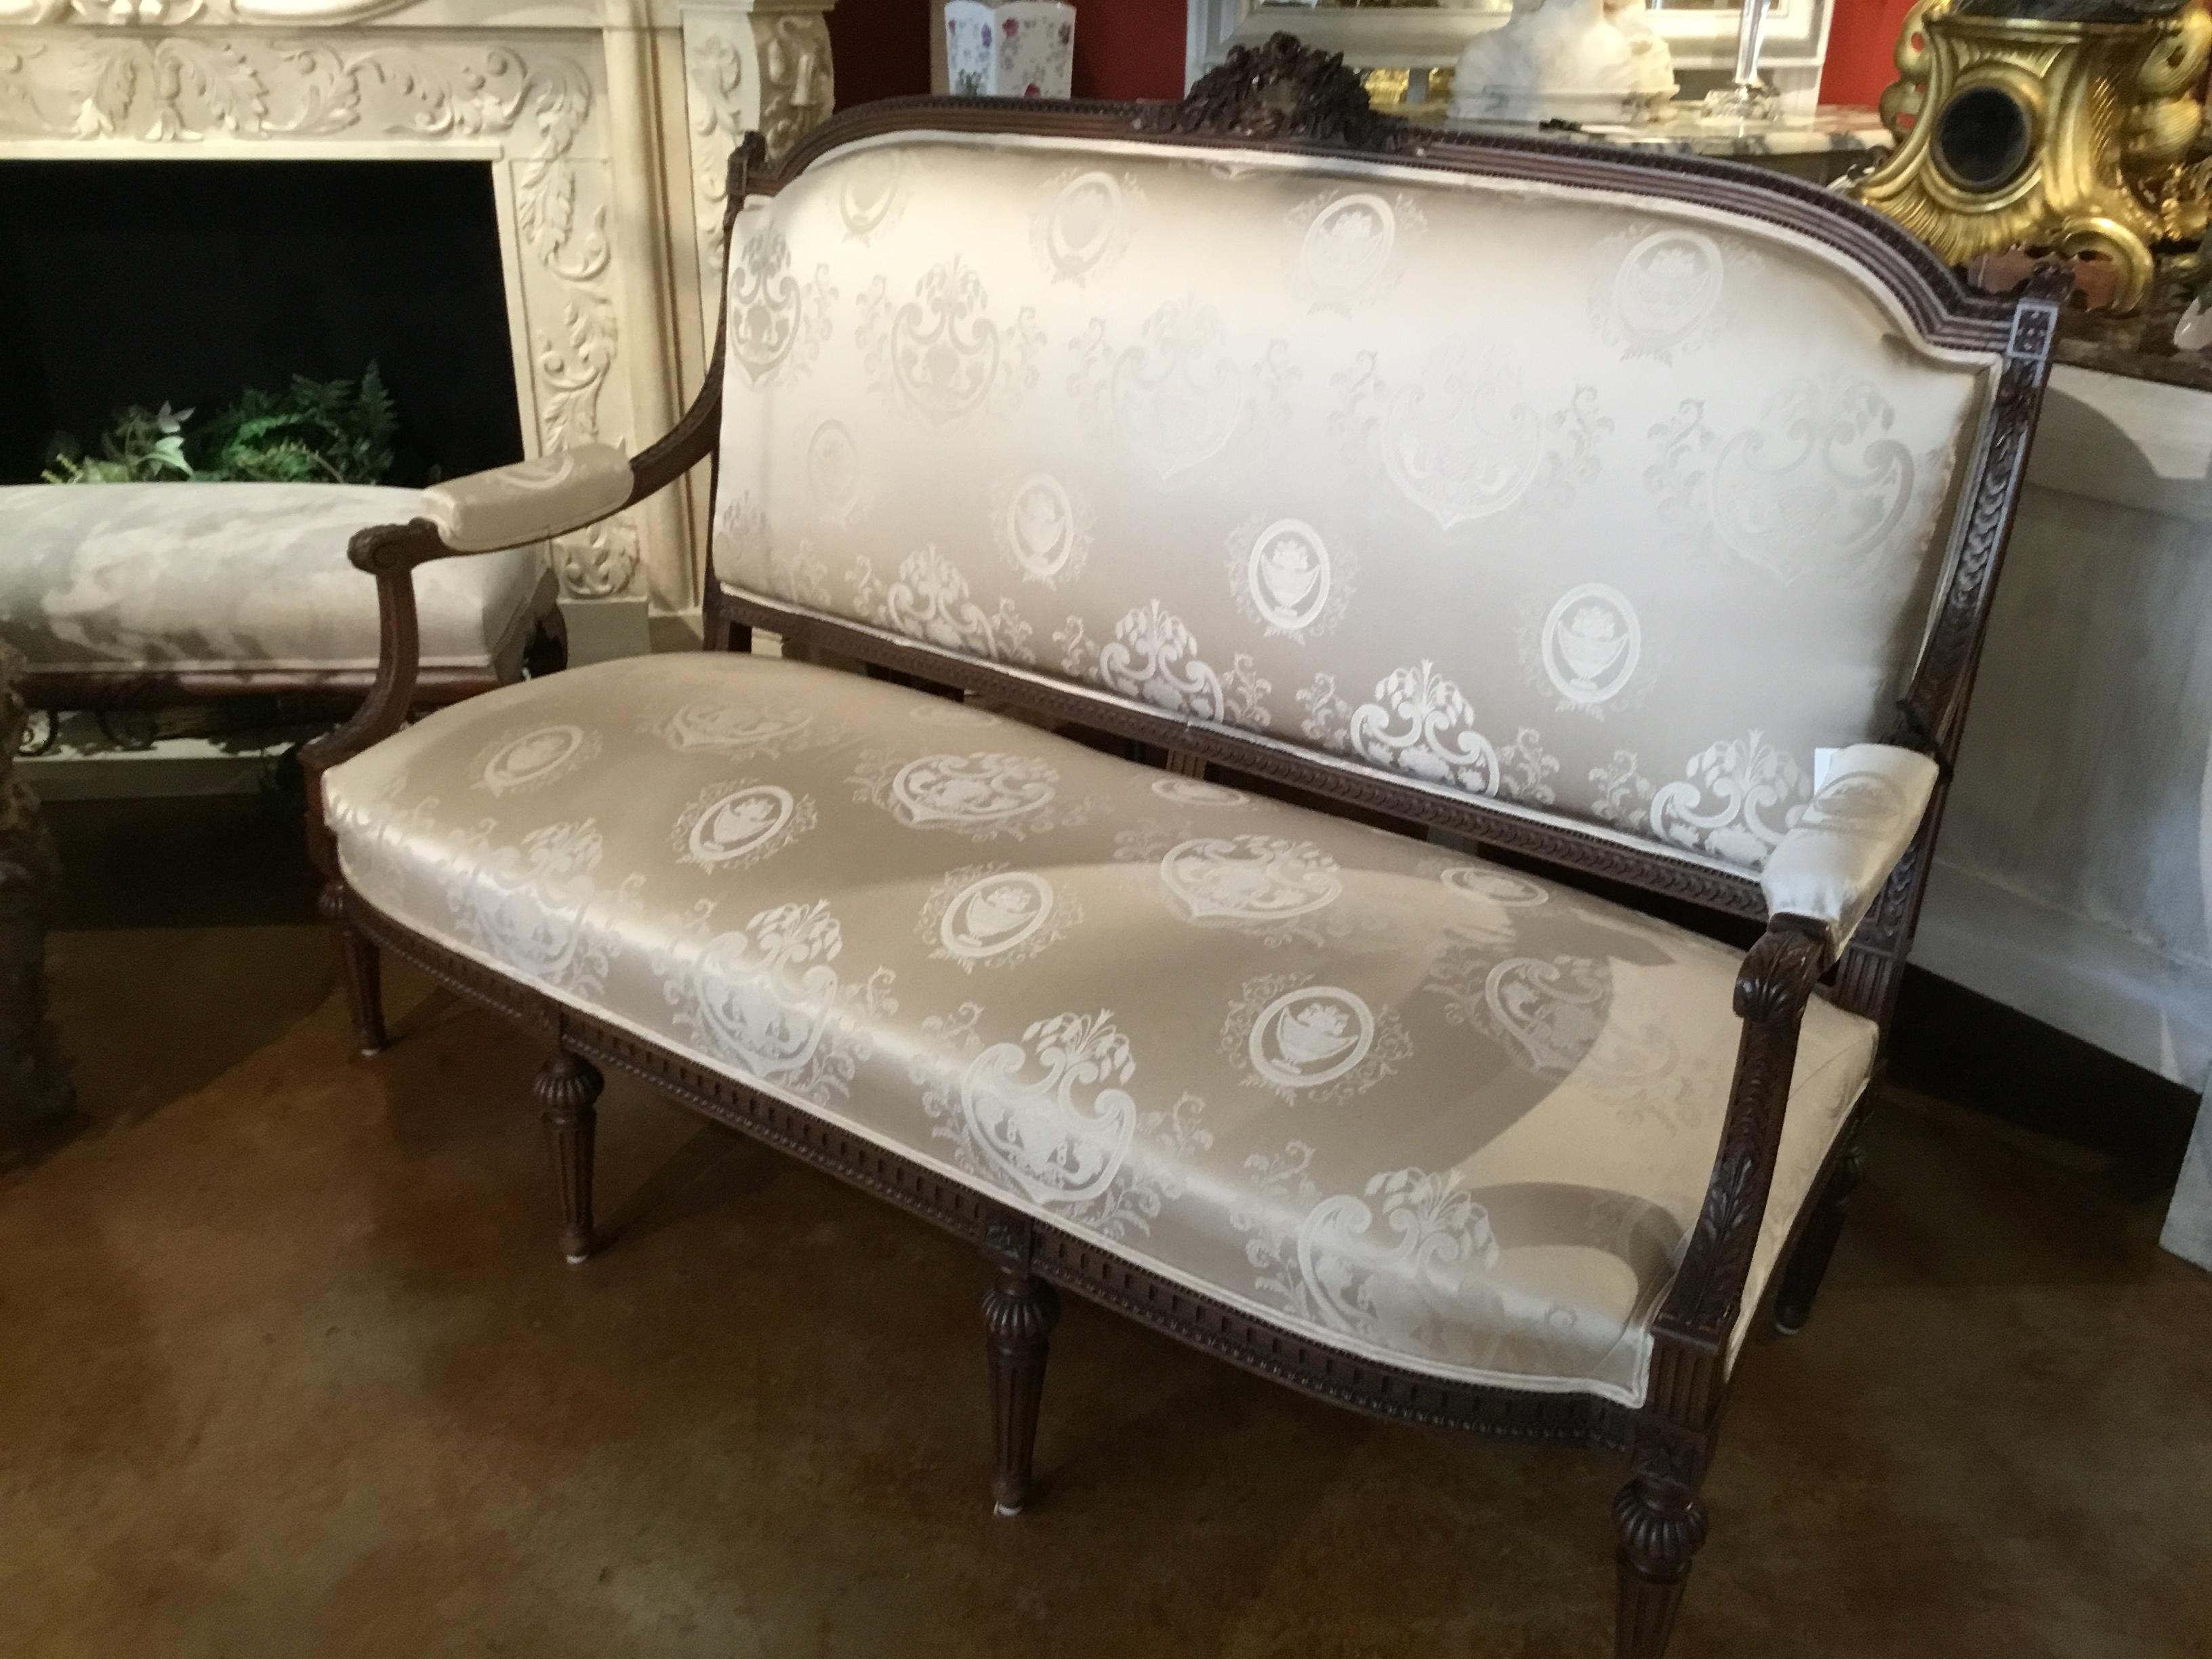 Beautifully carved frame in dark walnut finish with a carved wreath of roses
at the crest. Having a reeded carved leg and a shaped and delicately
curved arm. It is newly upholstered in a lovely white silk fabric in a French
motif.